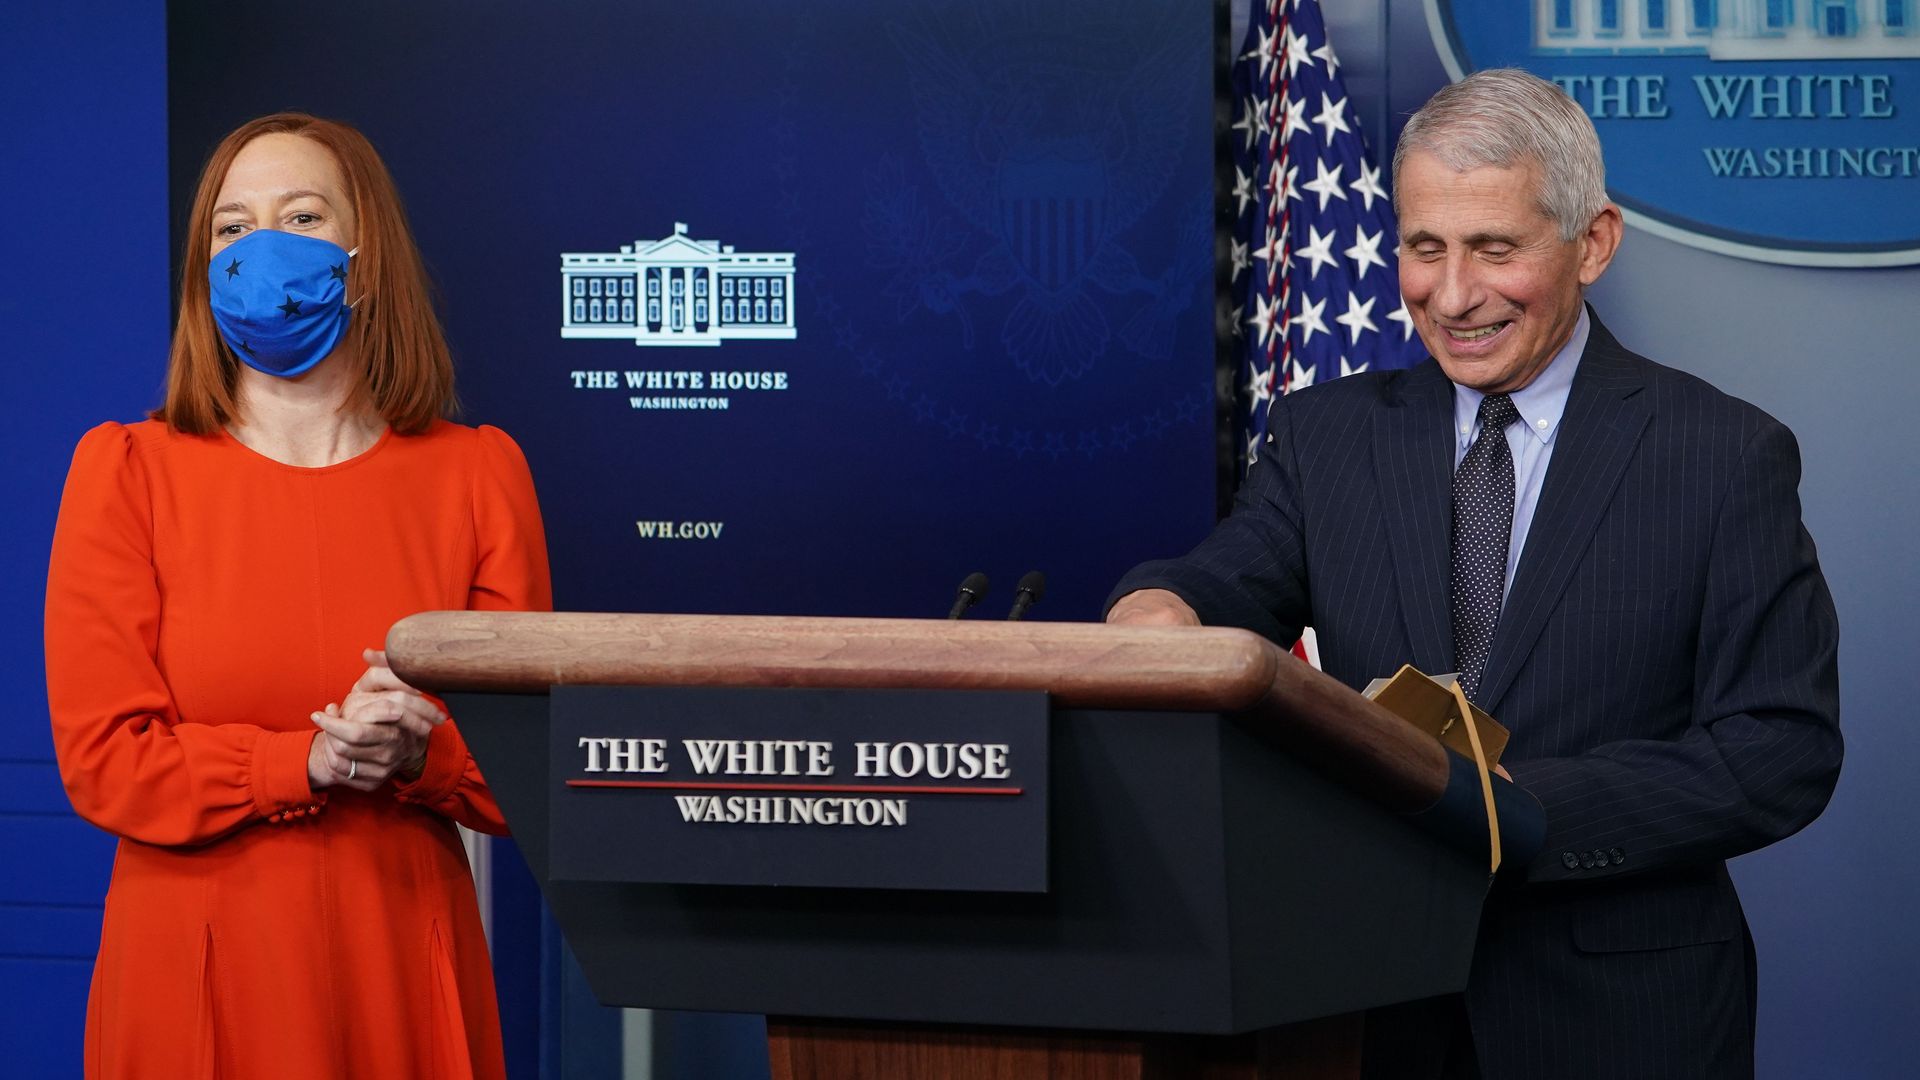 Dr. Anthony Fauci is seen at the White House podium after being welcomed back by new Press Secretary Jen Psaki.